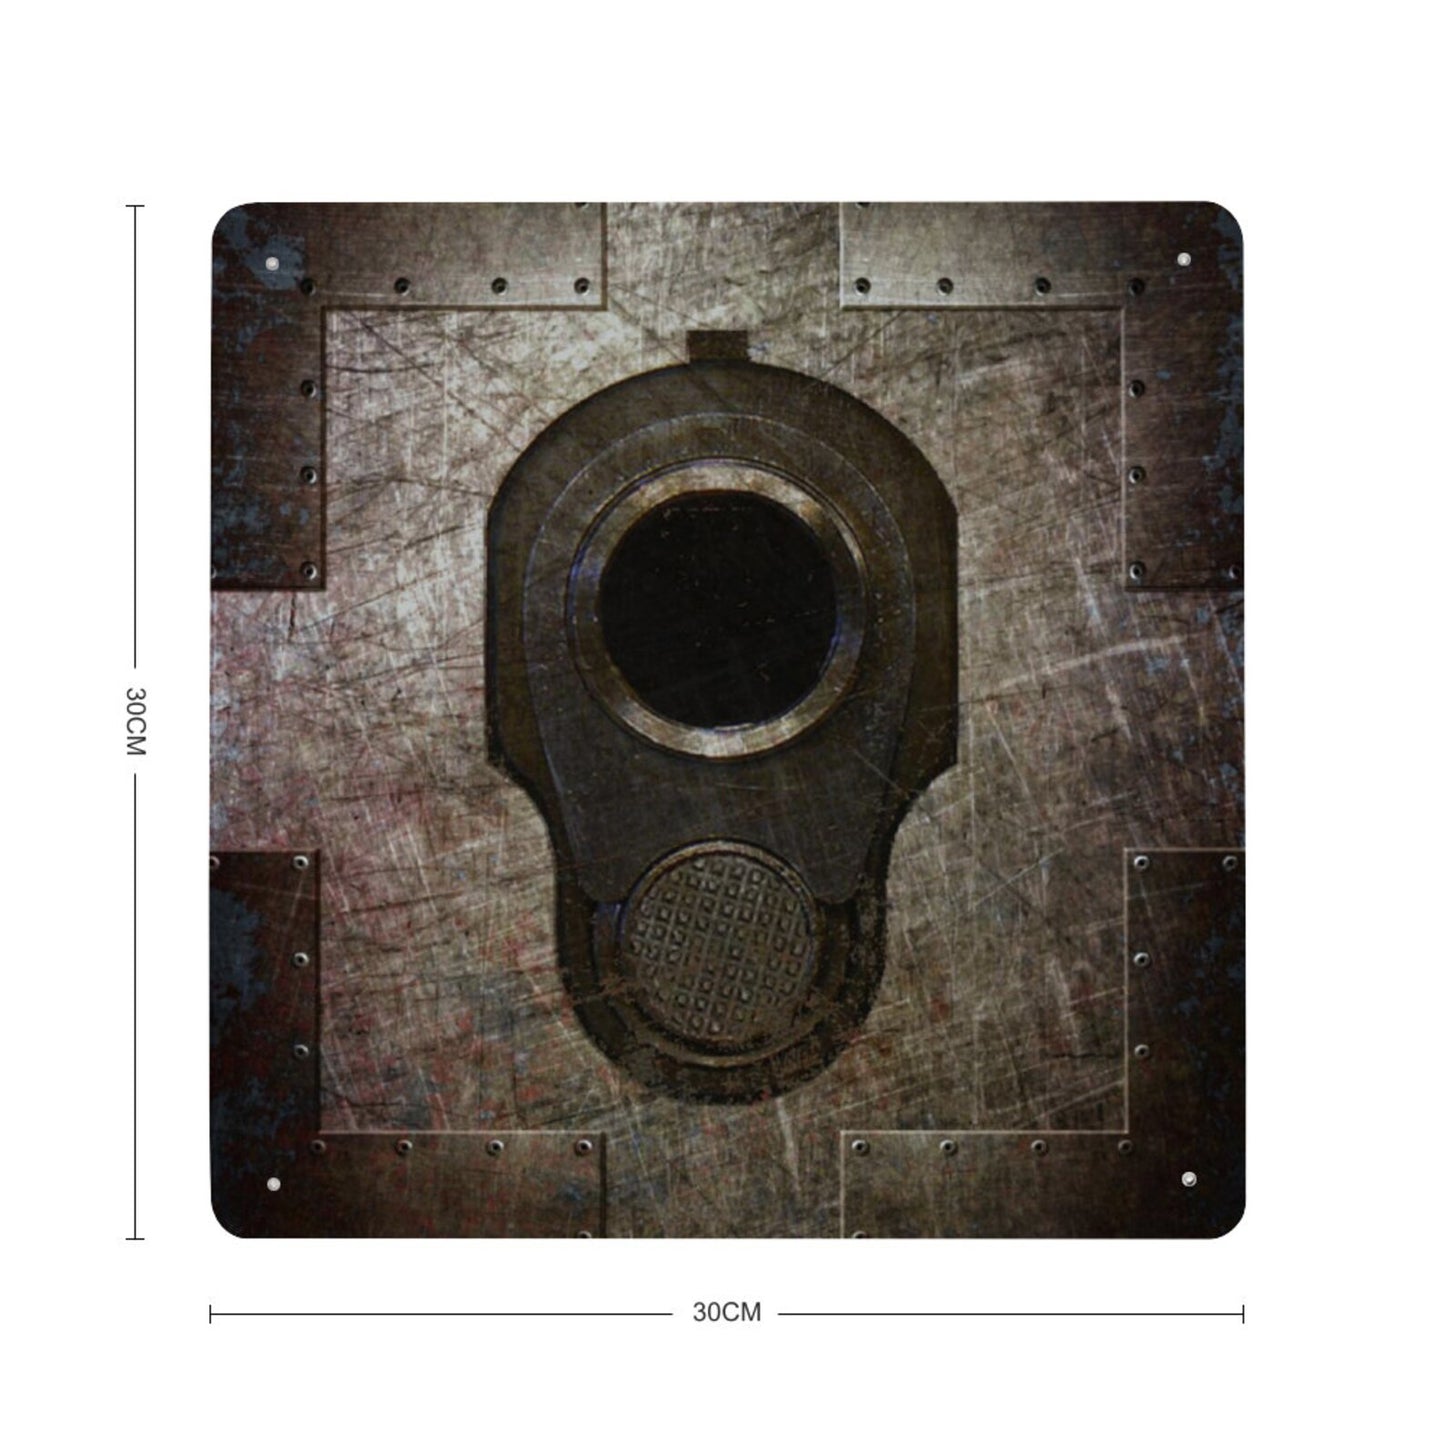 M1911 Colt 45 Muzzle on Distressed Metal Plate Print on Metal with dimensions